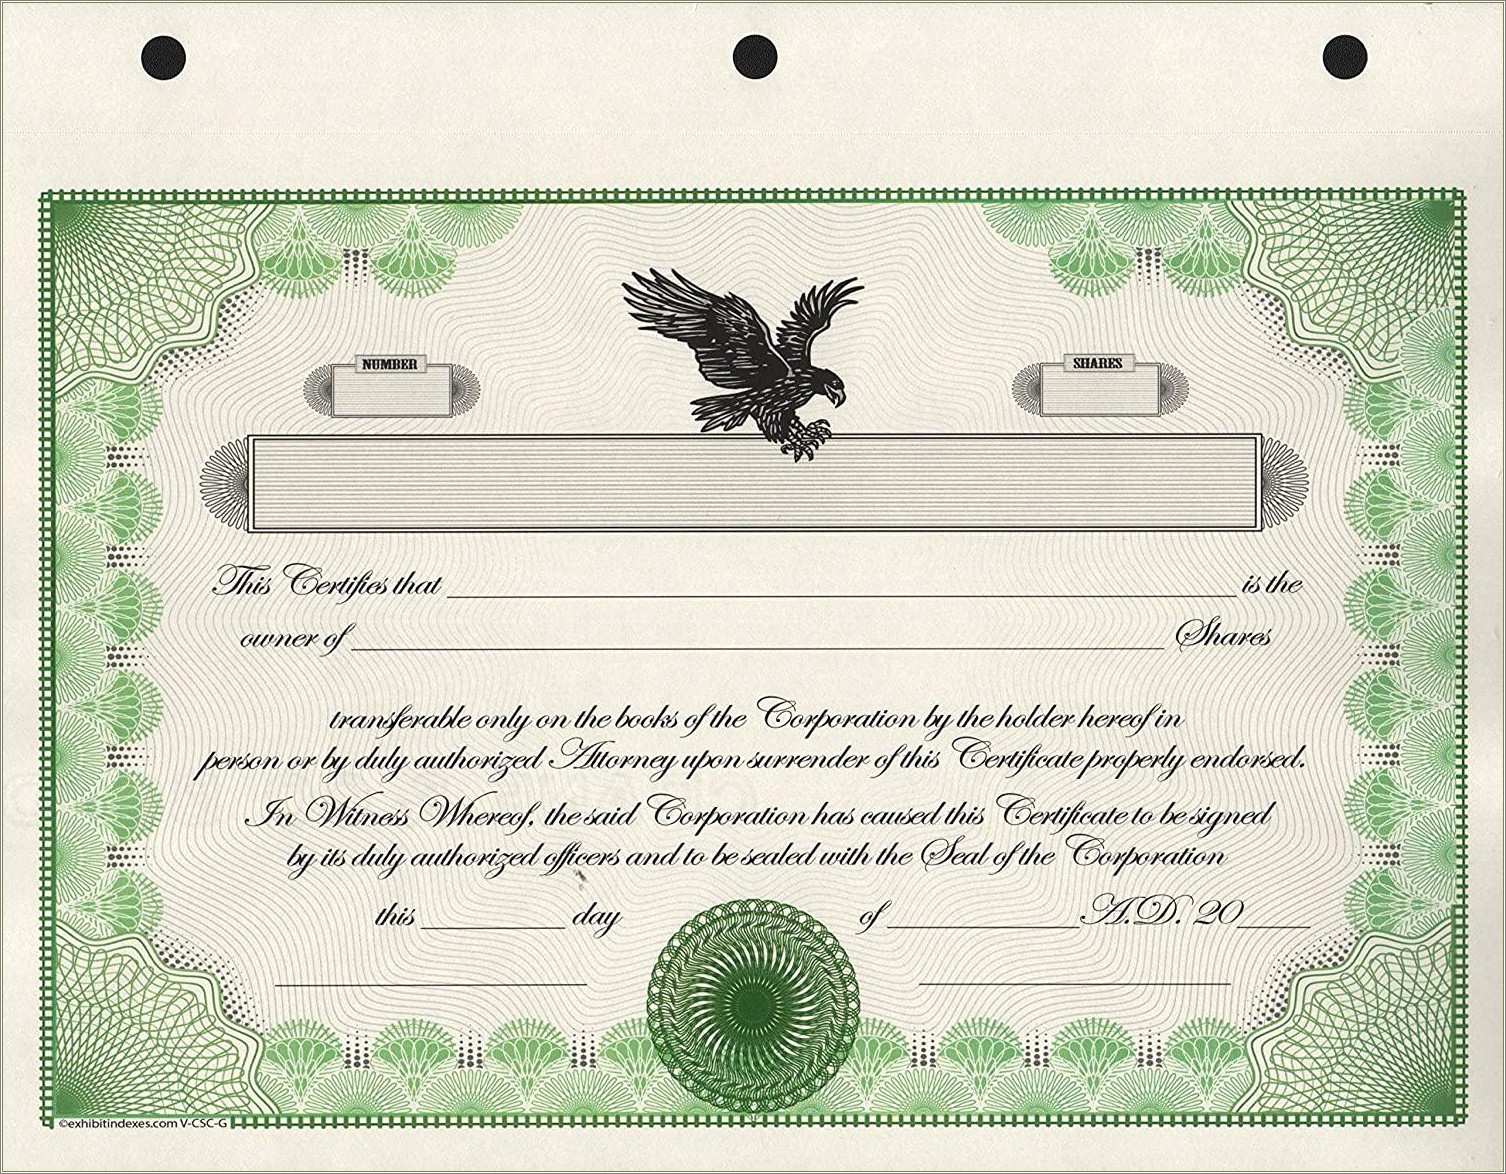 Free Sample And Word Templates For Stock Certificates